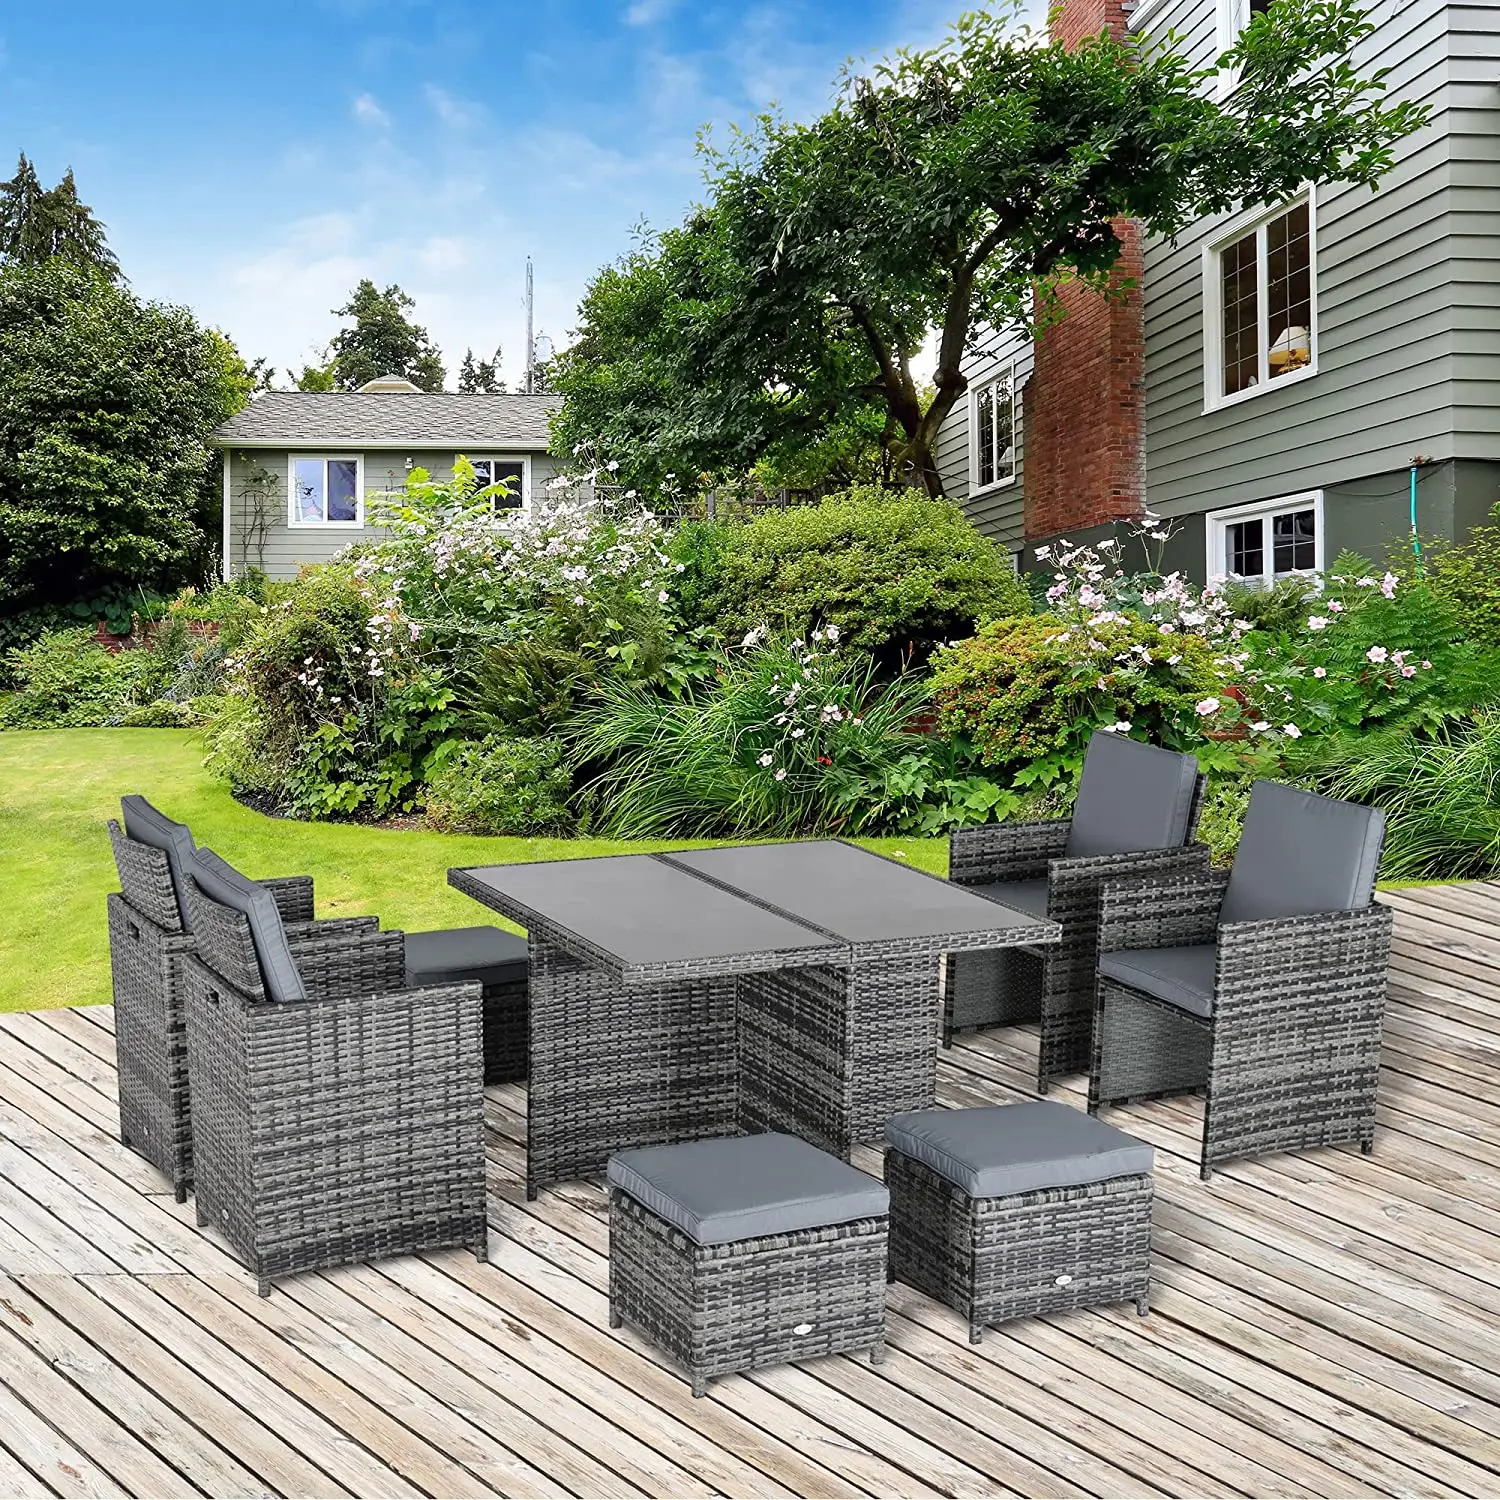 9 Pcs Patio furniture sets Outdoor furniture Rattan Furniture Dining sets with Chairs and Glass Table Space saving